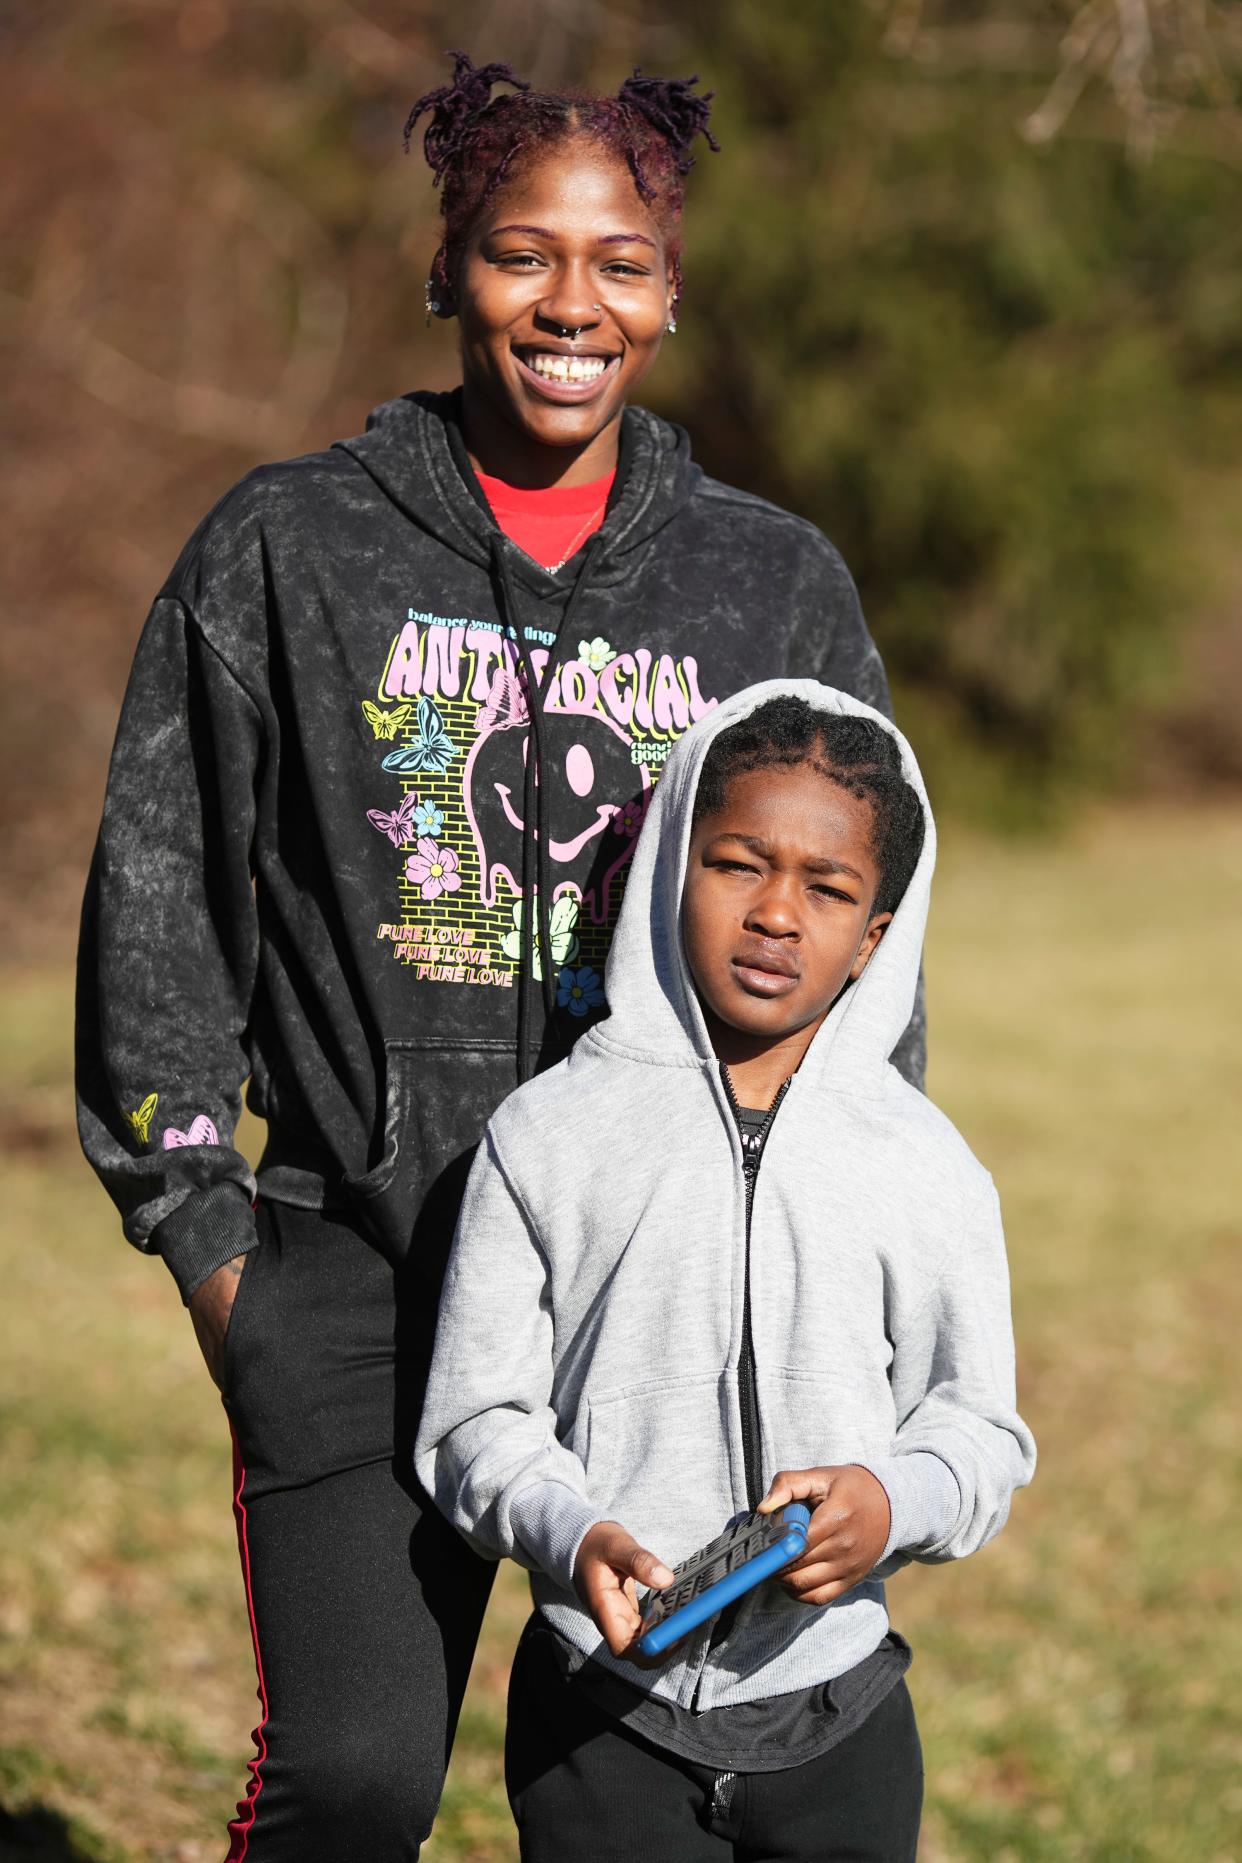 Cyan Pride, 23, and her 7-year-old son, Cy’Meir Pride, talk about their journey to receive a Section 8 housing voucher while staying at the YWCA Family Center on the Near East Side. Pride is excited to be able to move into her own place near where she works and her son goes to school.